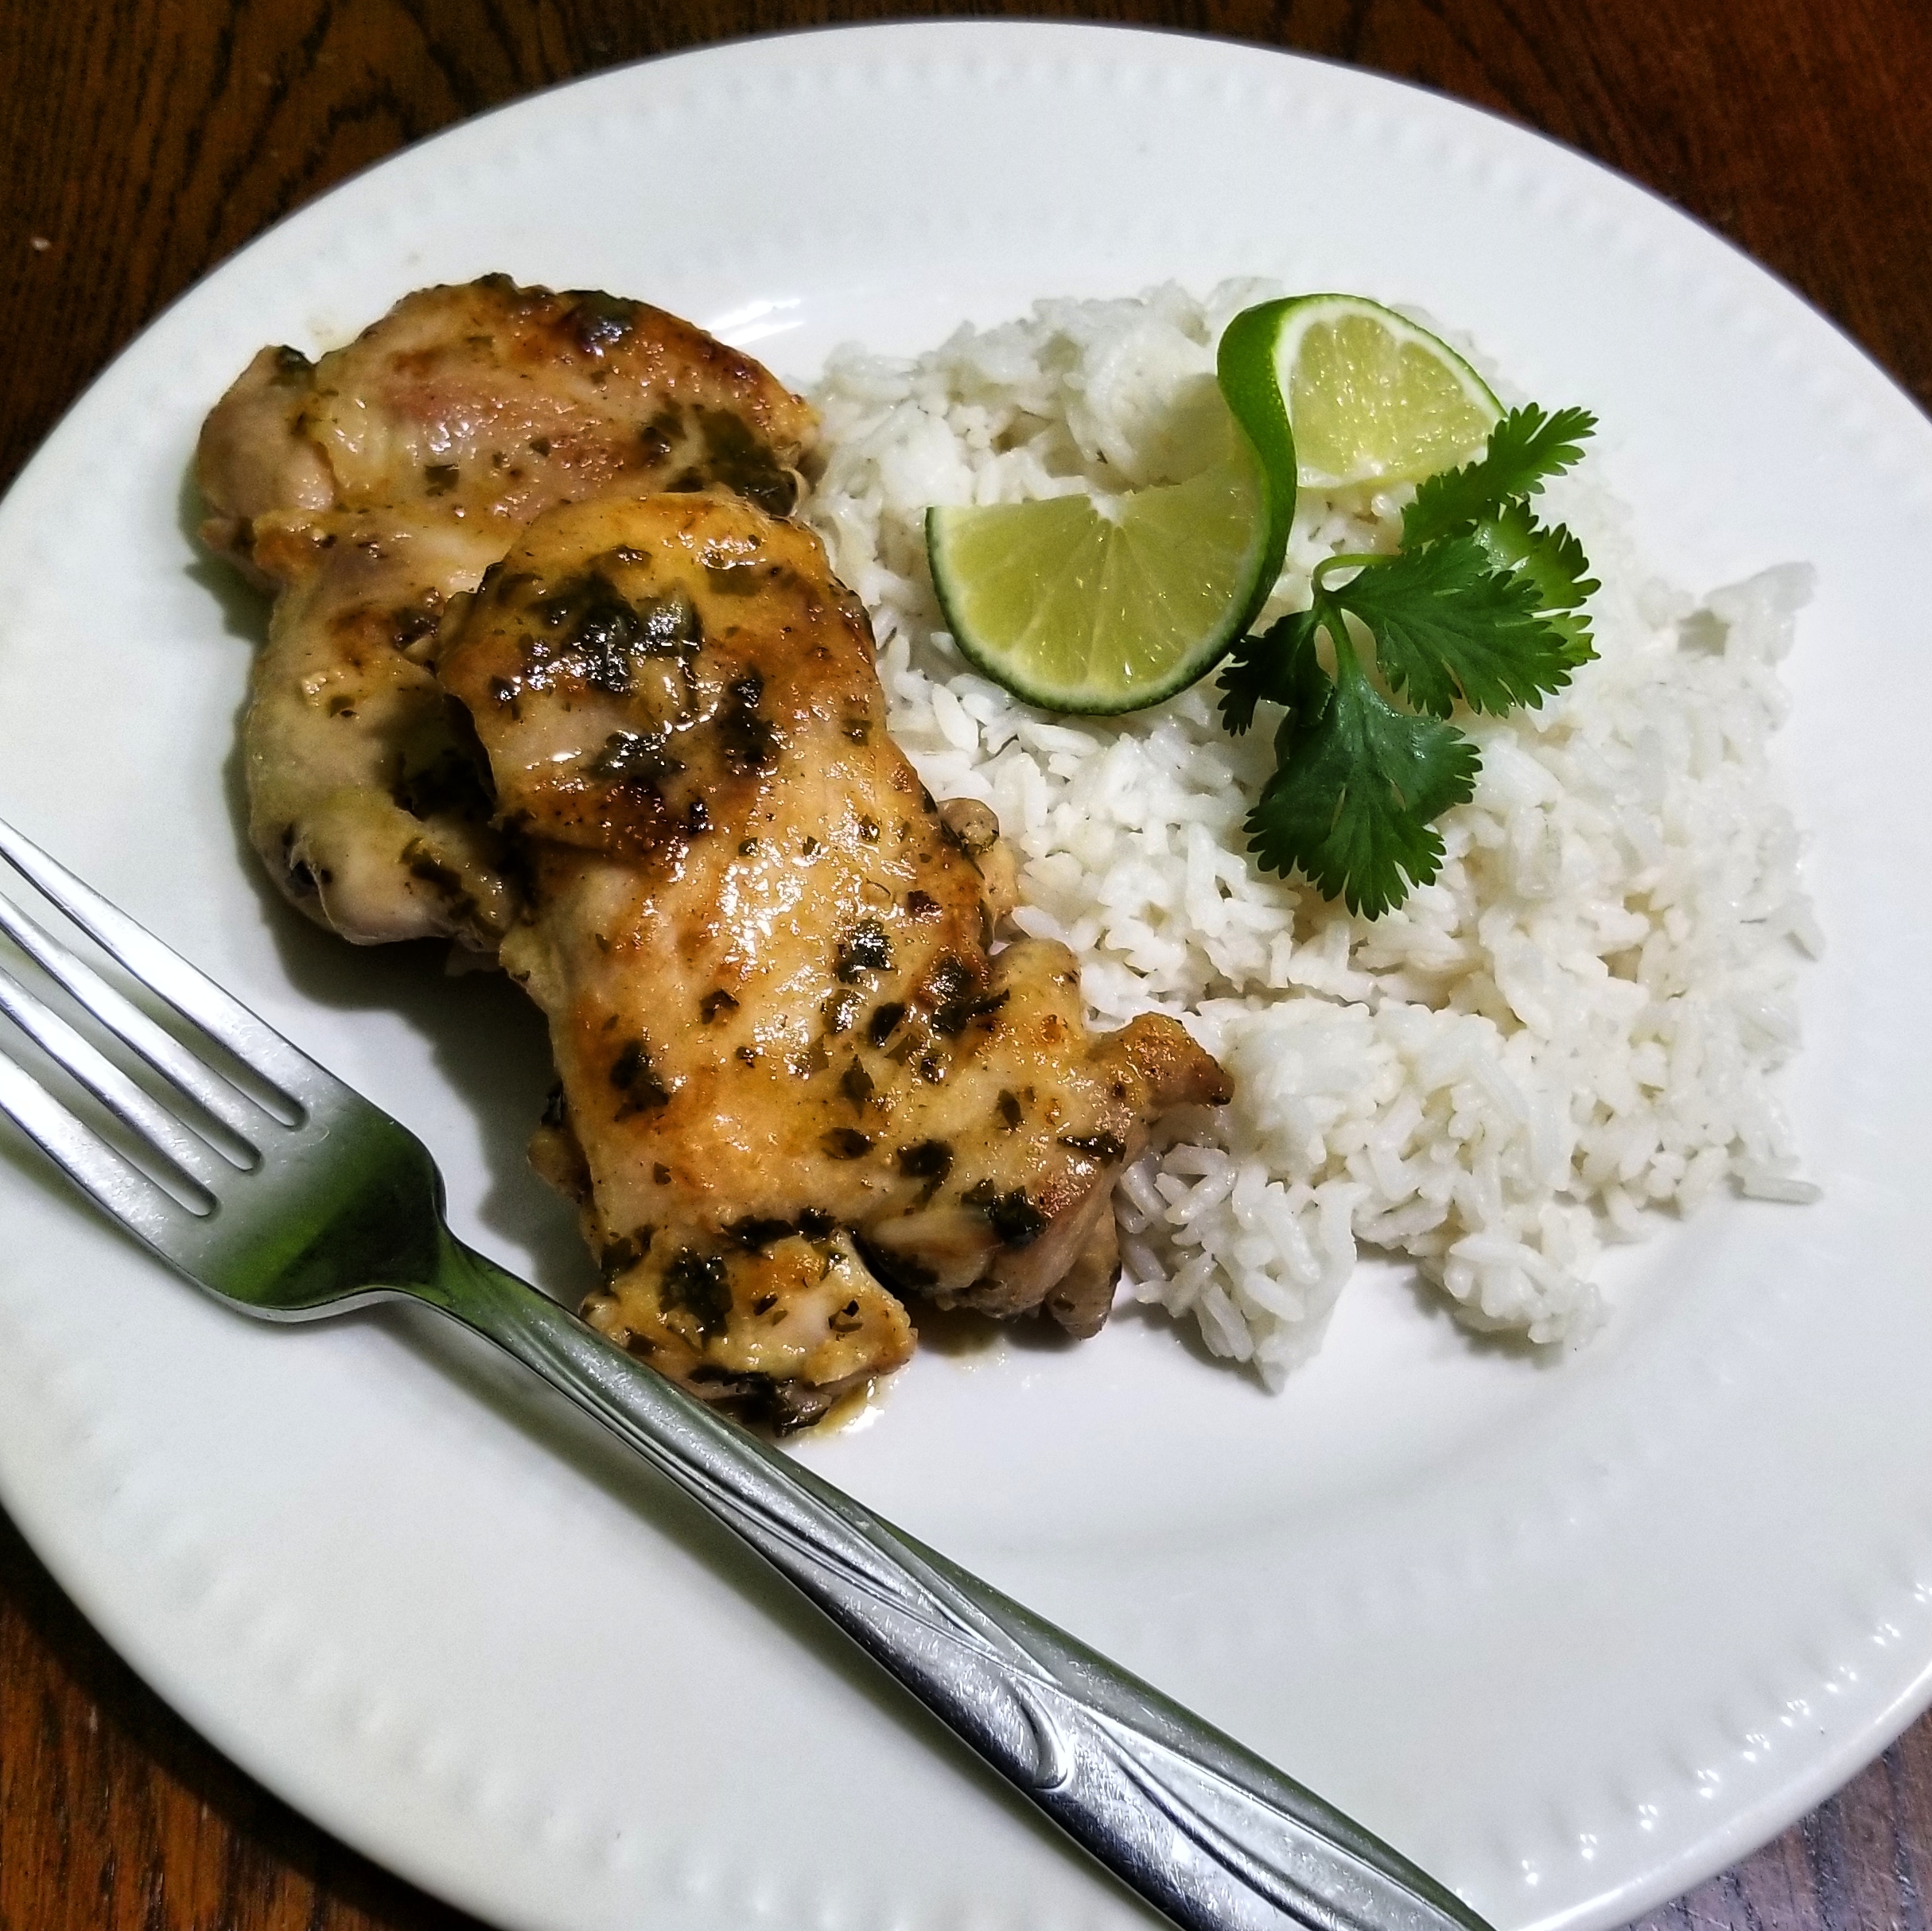 Cilantro Lime Chicken Thighs image